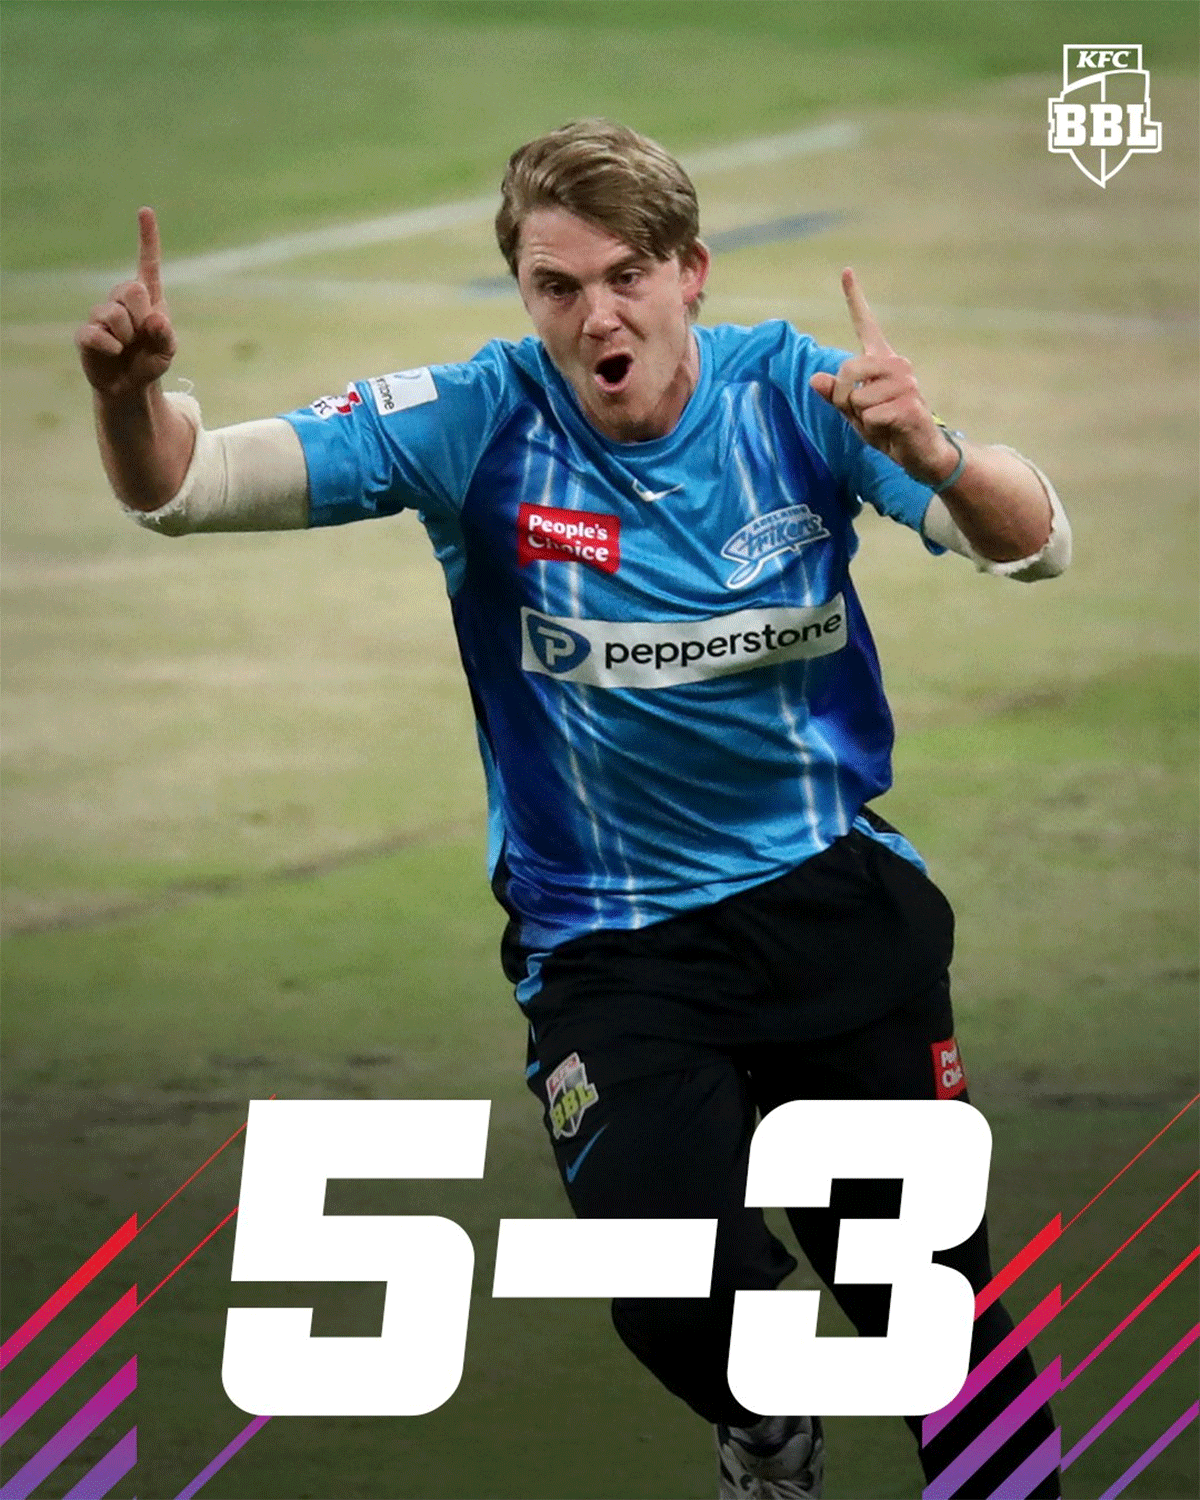 Adelaide Strikers' Henry Thorton finished with sensational figures of 5 for 3